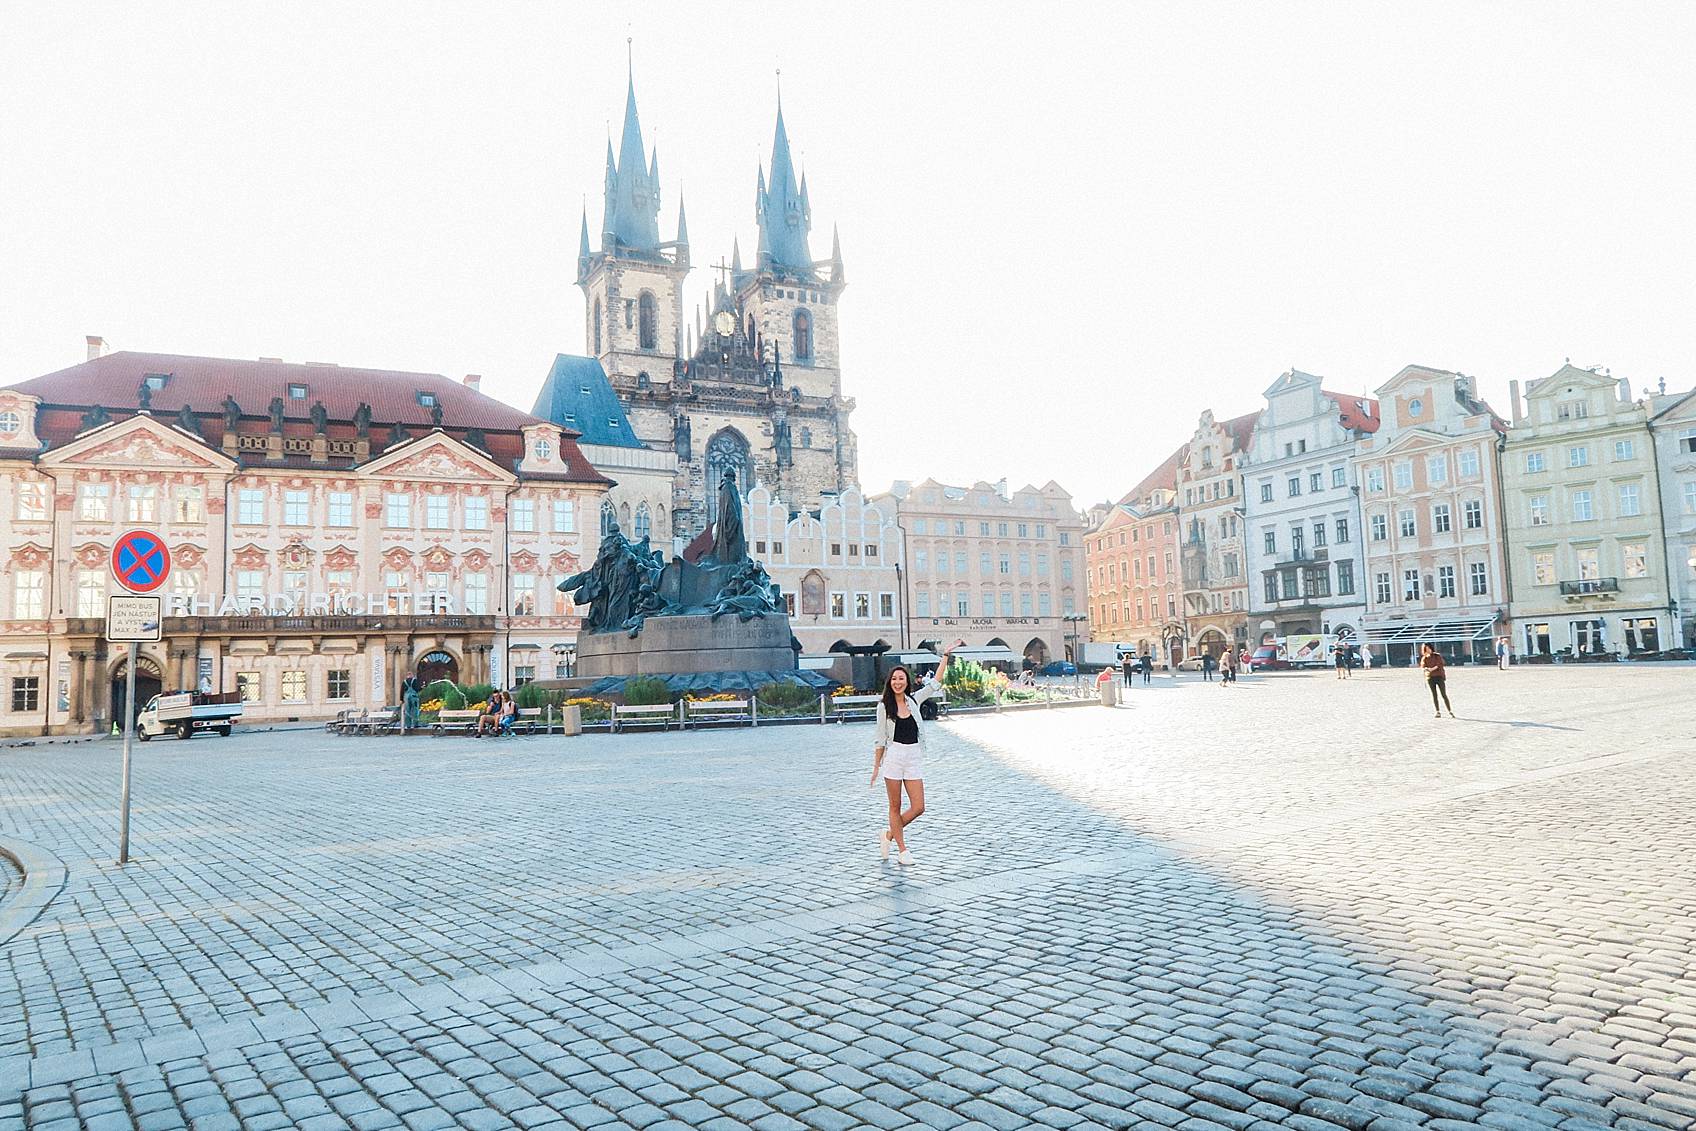 Photo guide to Prague: Old town square 